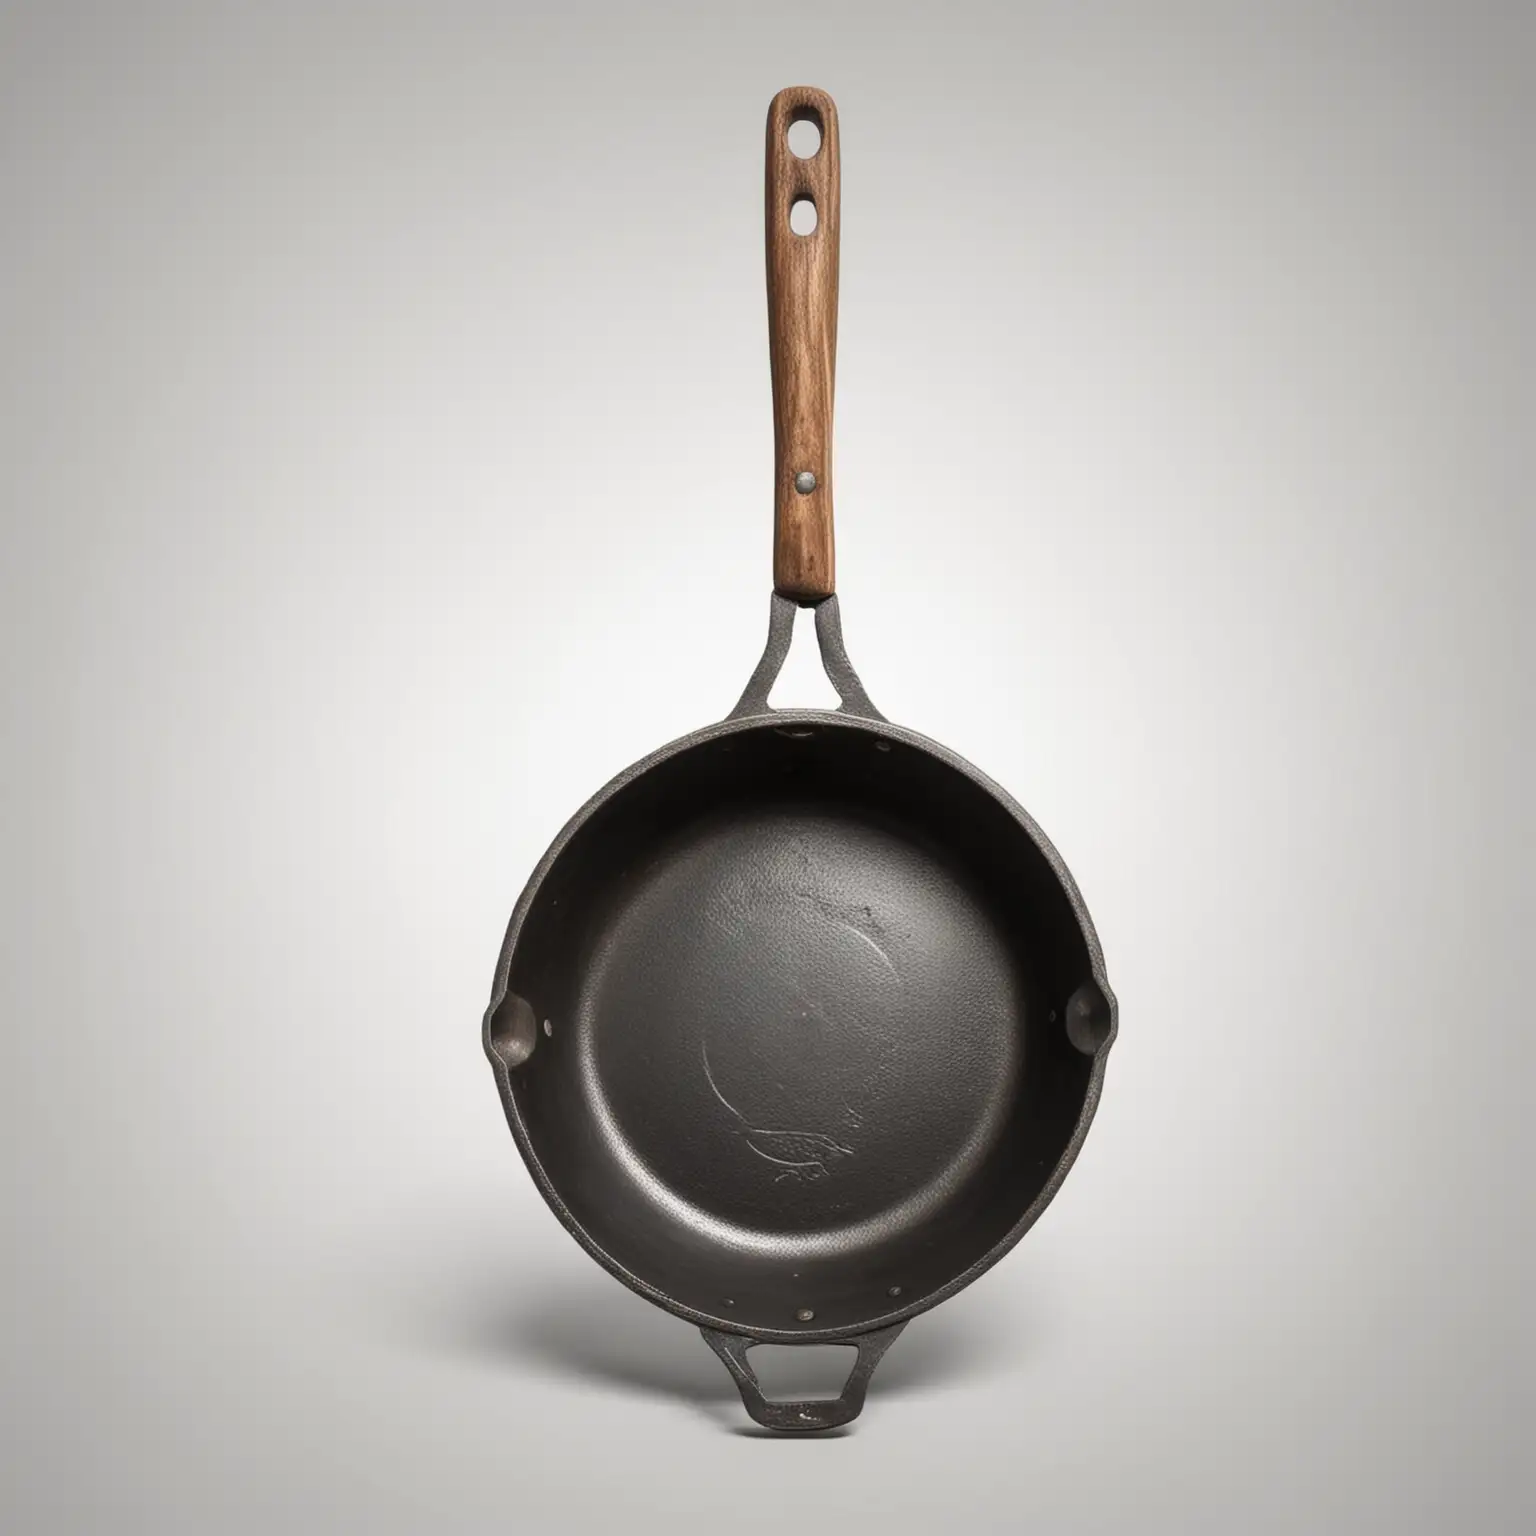 Ancient-Skillet-with-Long-Handle-High-Quality-Steel-on-White-Background